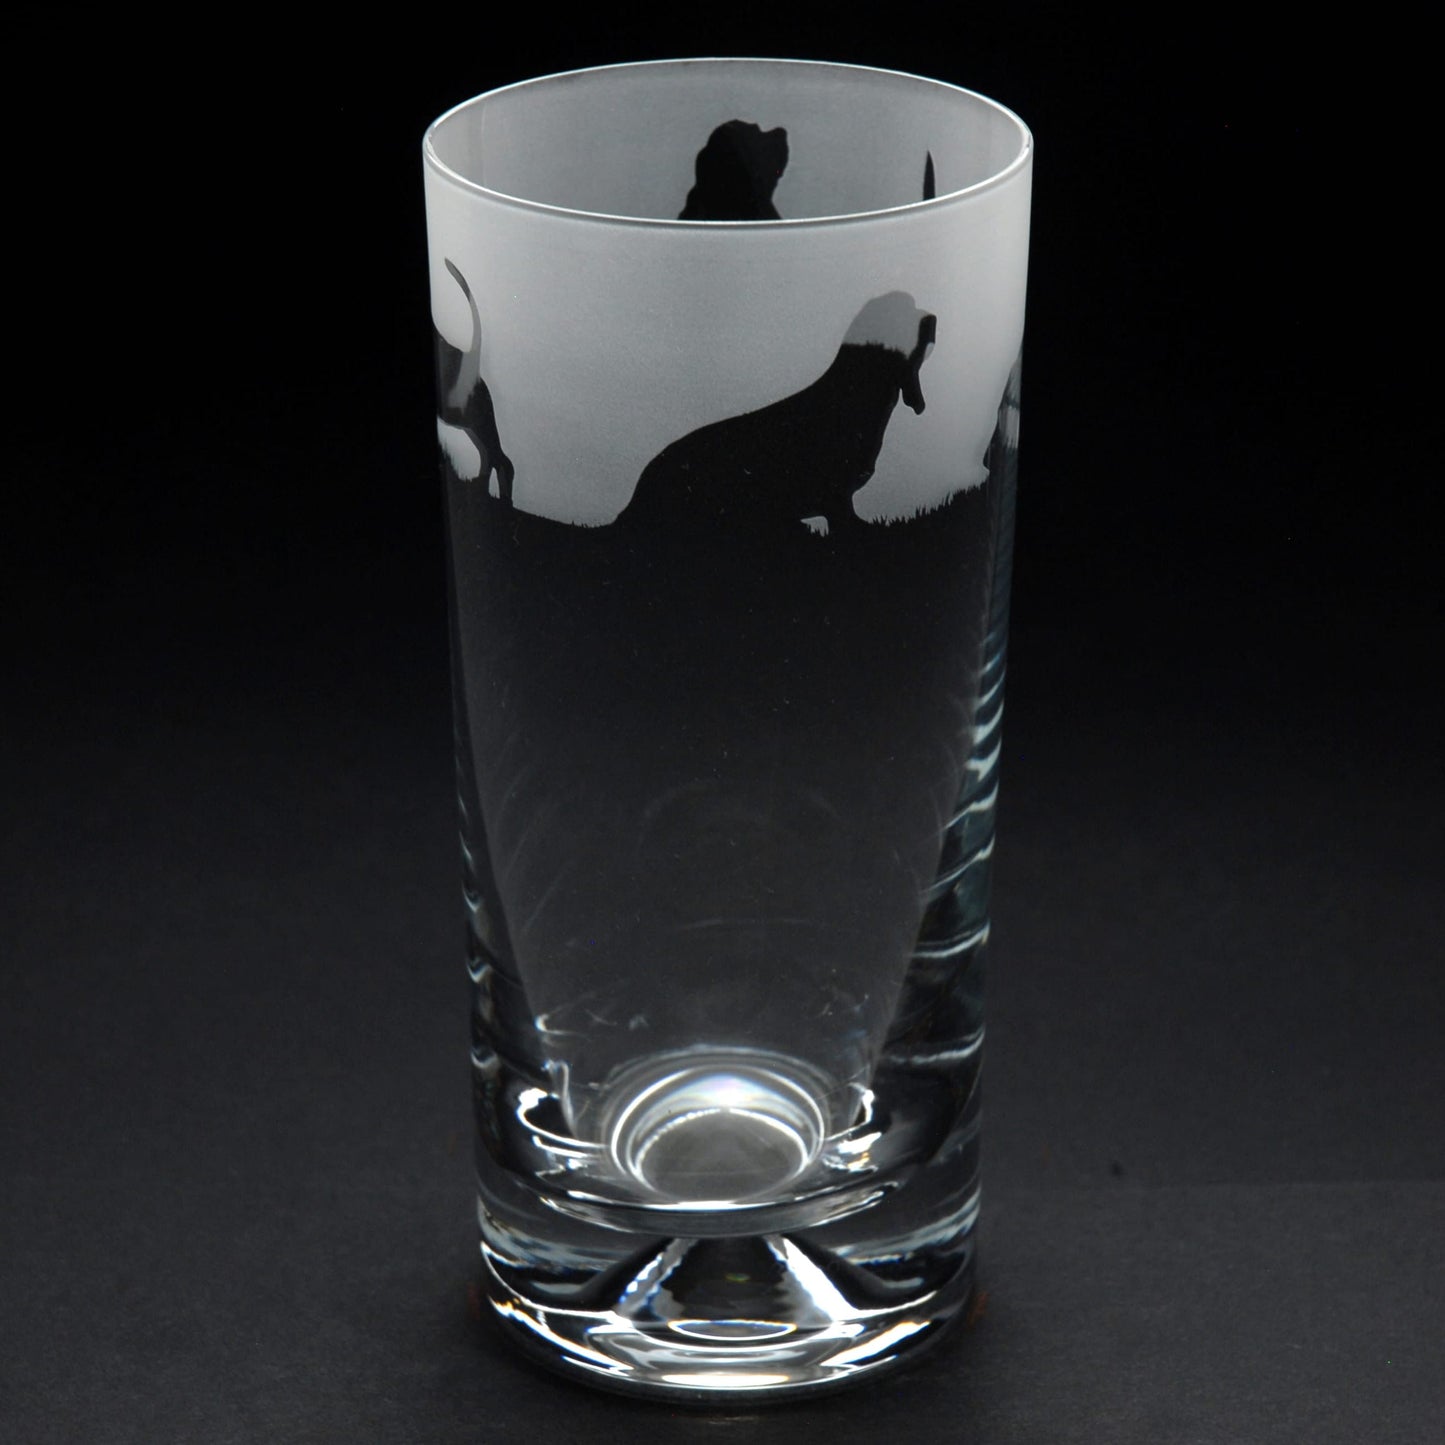 Basset Hound Dog Highball Glass - Hand Etched/Engraved Gift